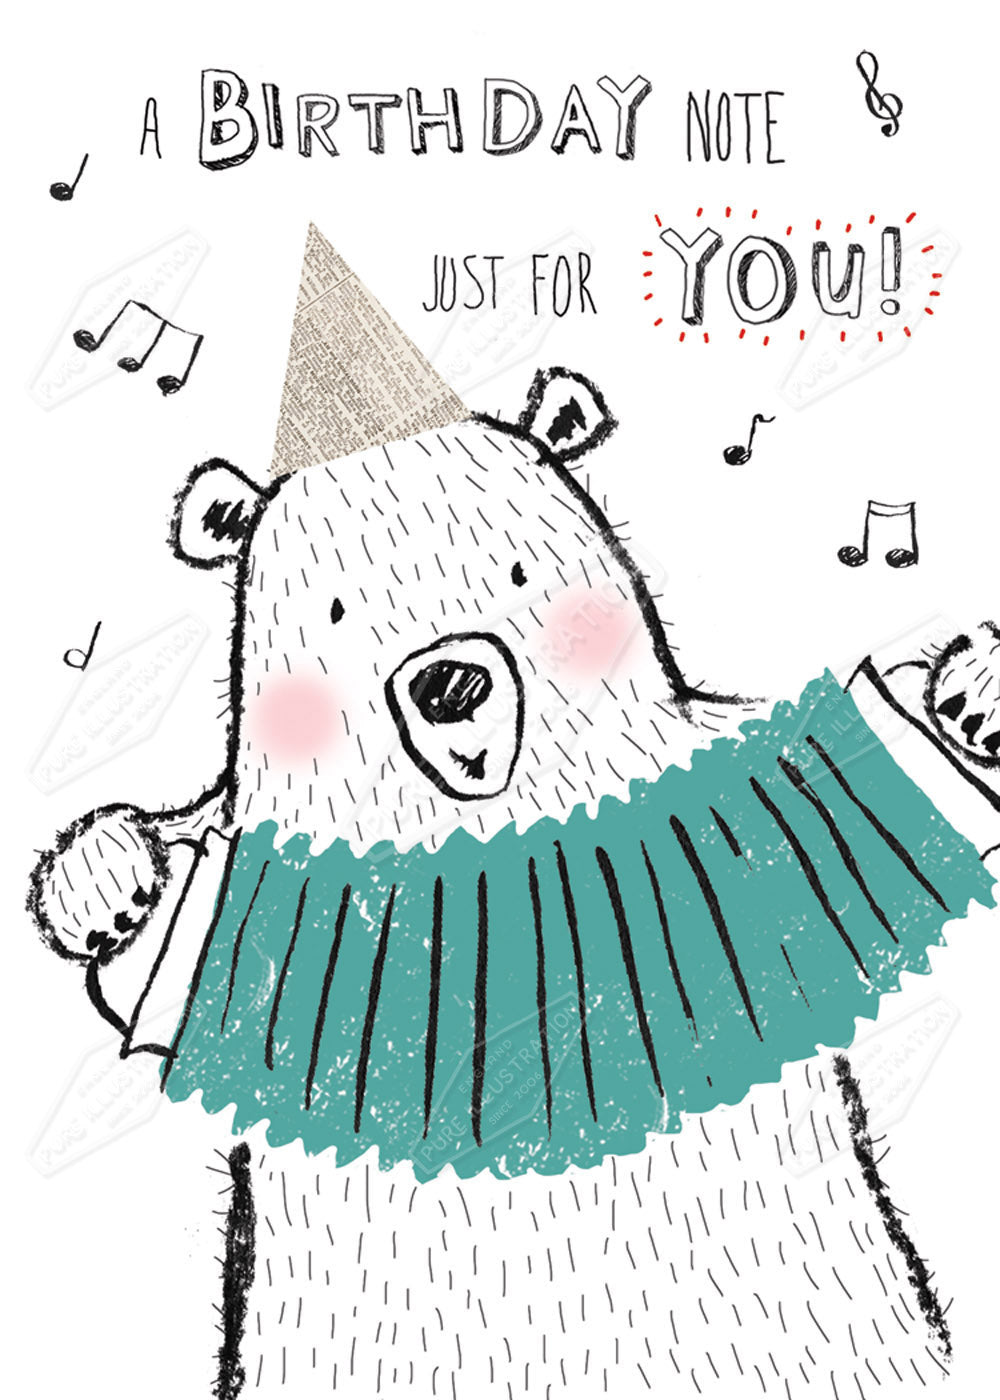 Birthday Daddy Bear Greeting Card Design by Cory Reid for Pure art Licensing Agency & Surface Design Studio